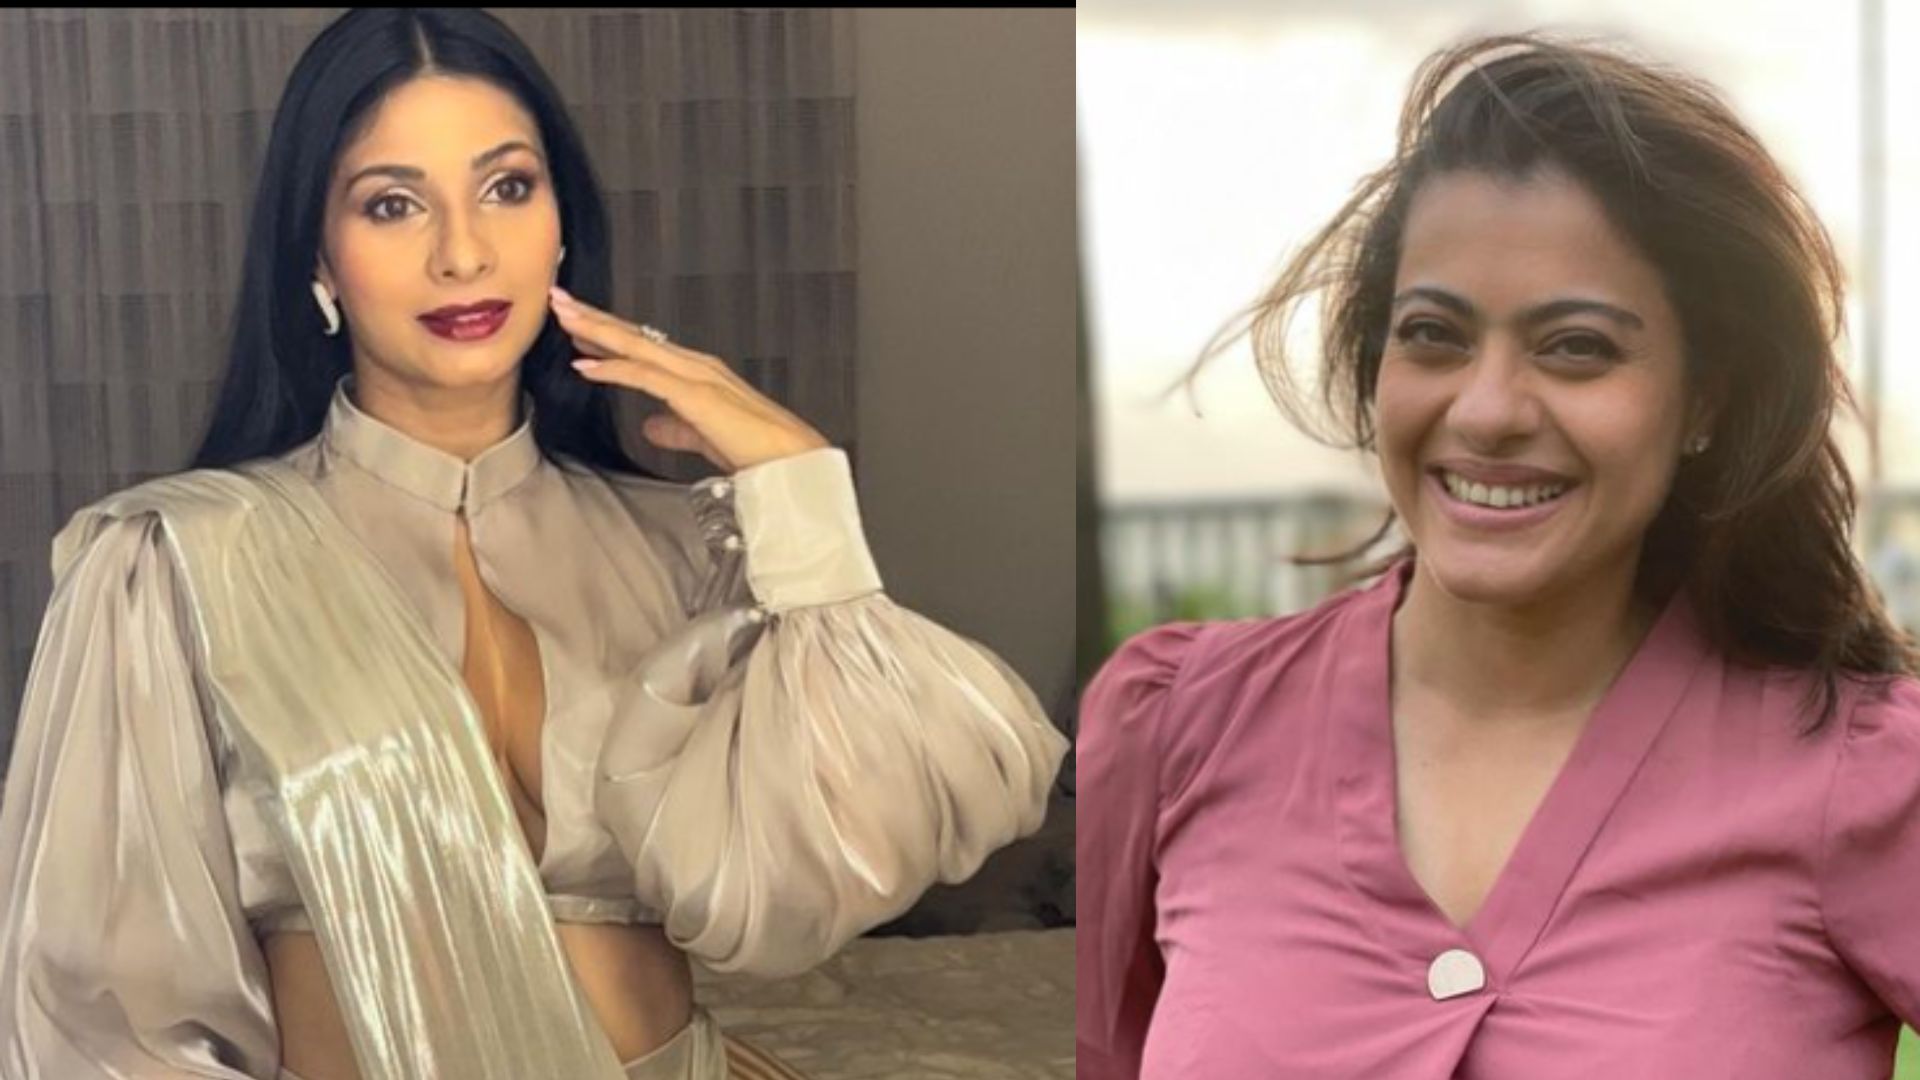 Tanishaa Mukerji Finds Comparisons With Sister Kajol Unnecessary. She’s Right, Not Everyone’s The Same